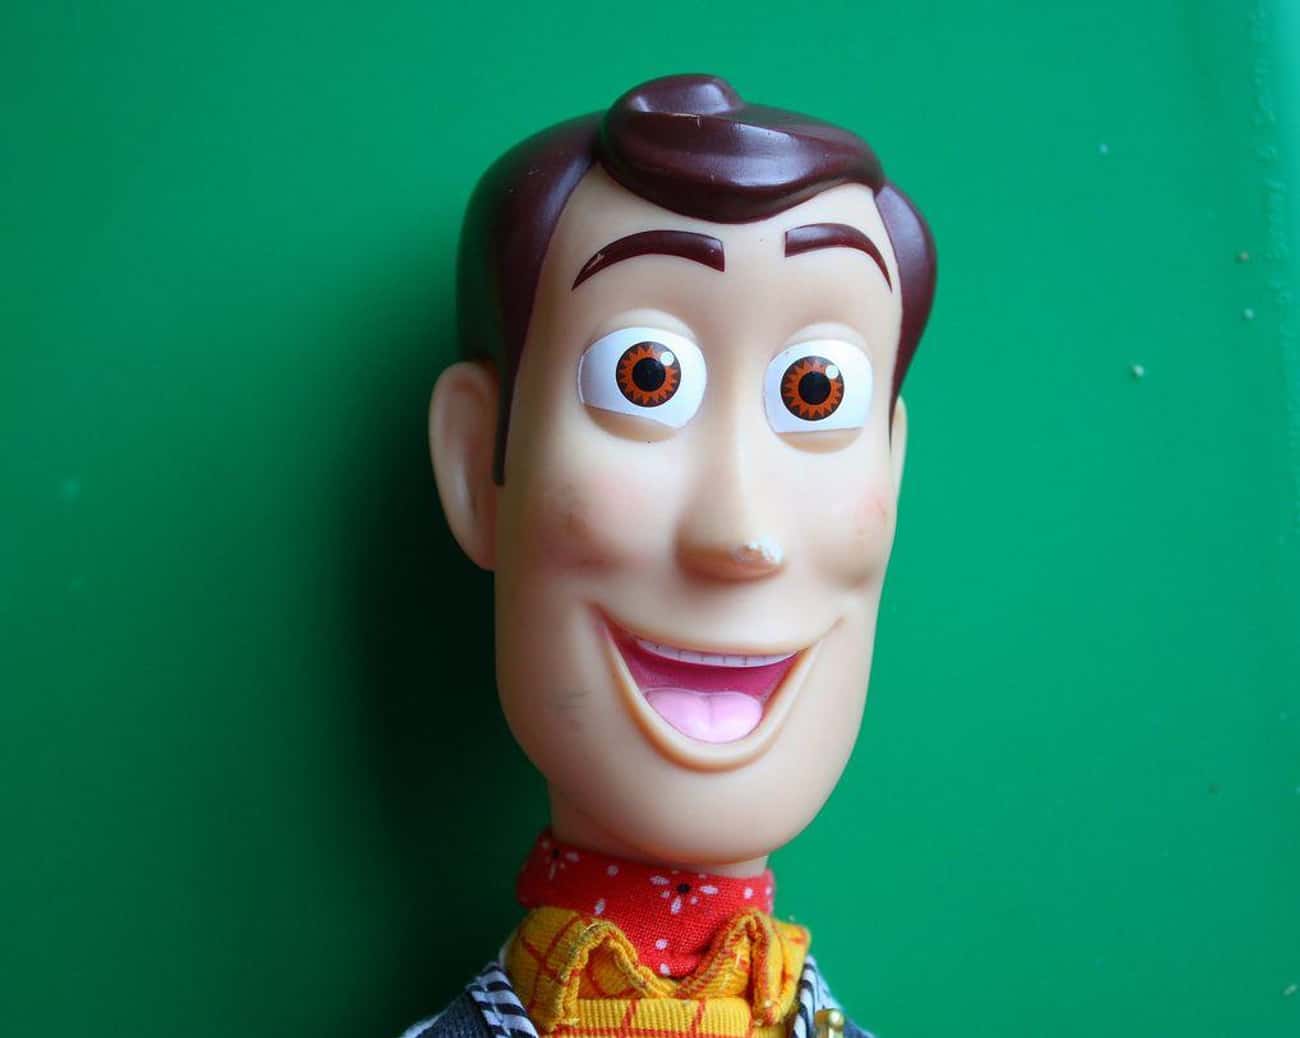 Woody Was Almost a Ventriloquist Dummy